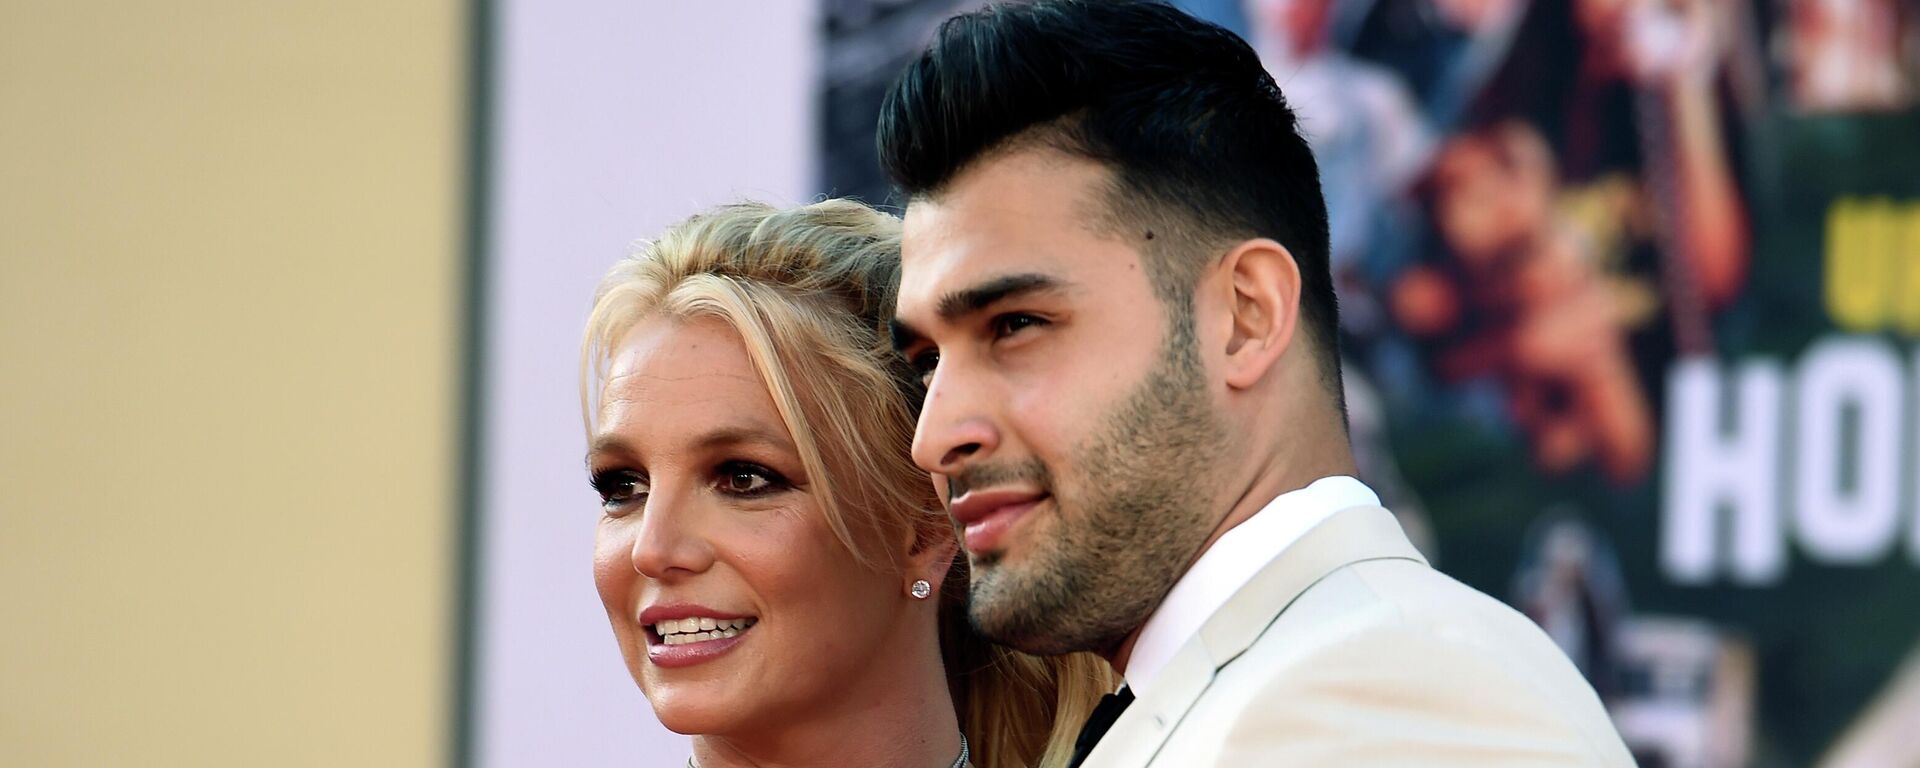 Britney Spears and Sam Asghari arrive at the Los Angeles premiere of Once Upon a Time in Hollywood, at the TCL Chinese Theatre, Monday, July 22, 2019. - Sputnik International, 1920, 10.06.2022